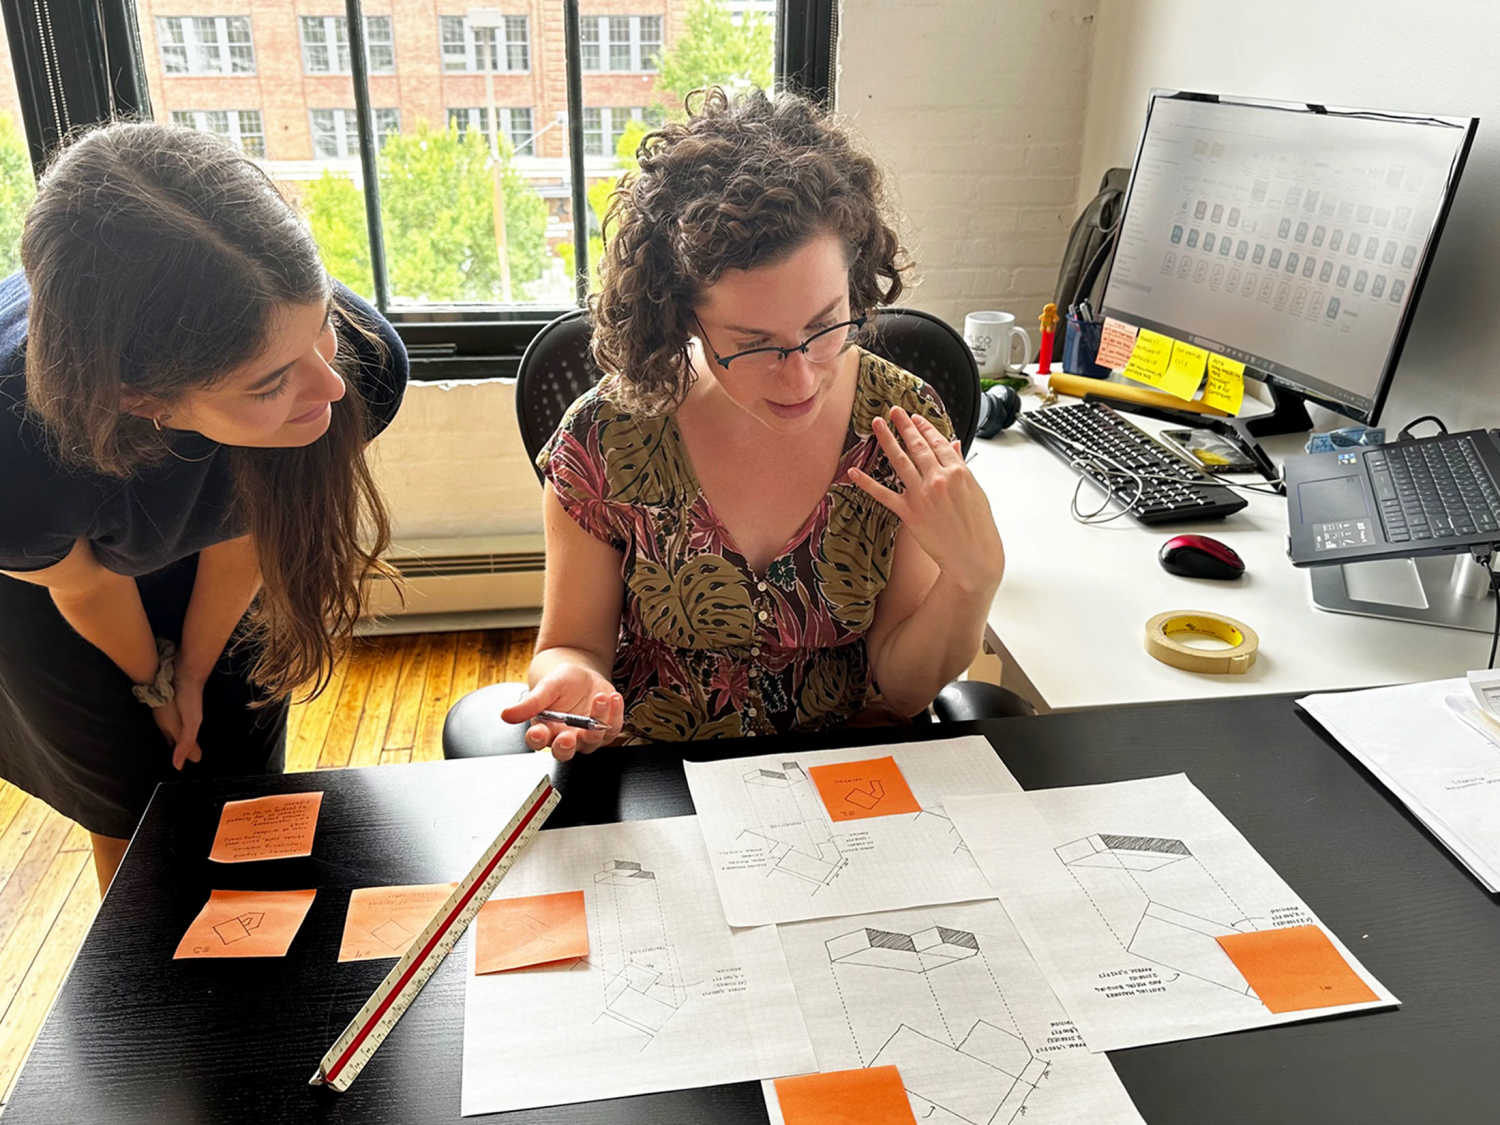 NDC staff members Julia and Karla review project plans at our Baltimore office.